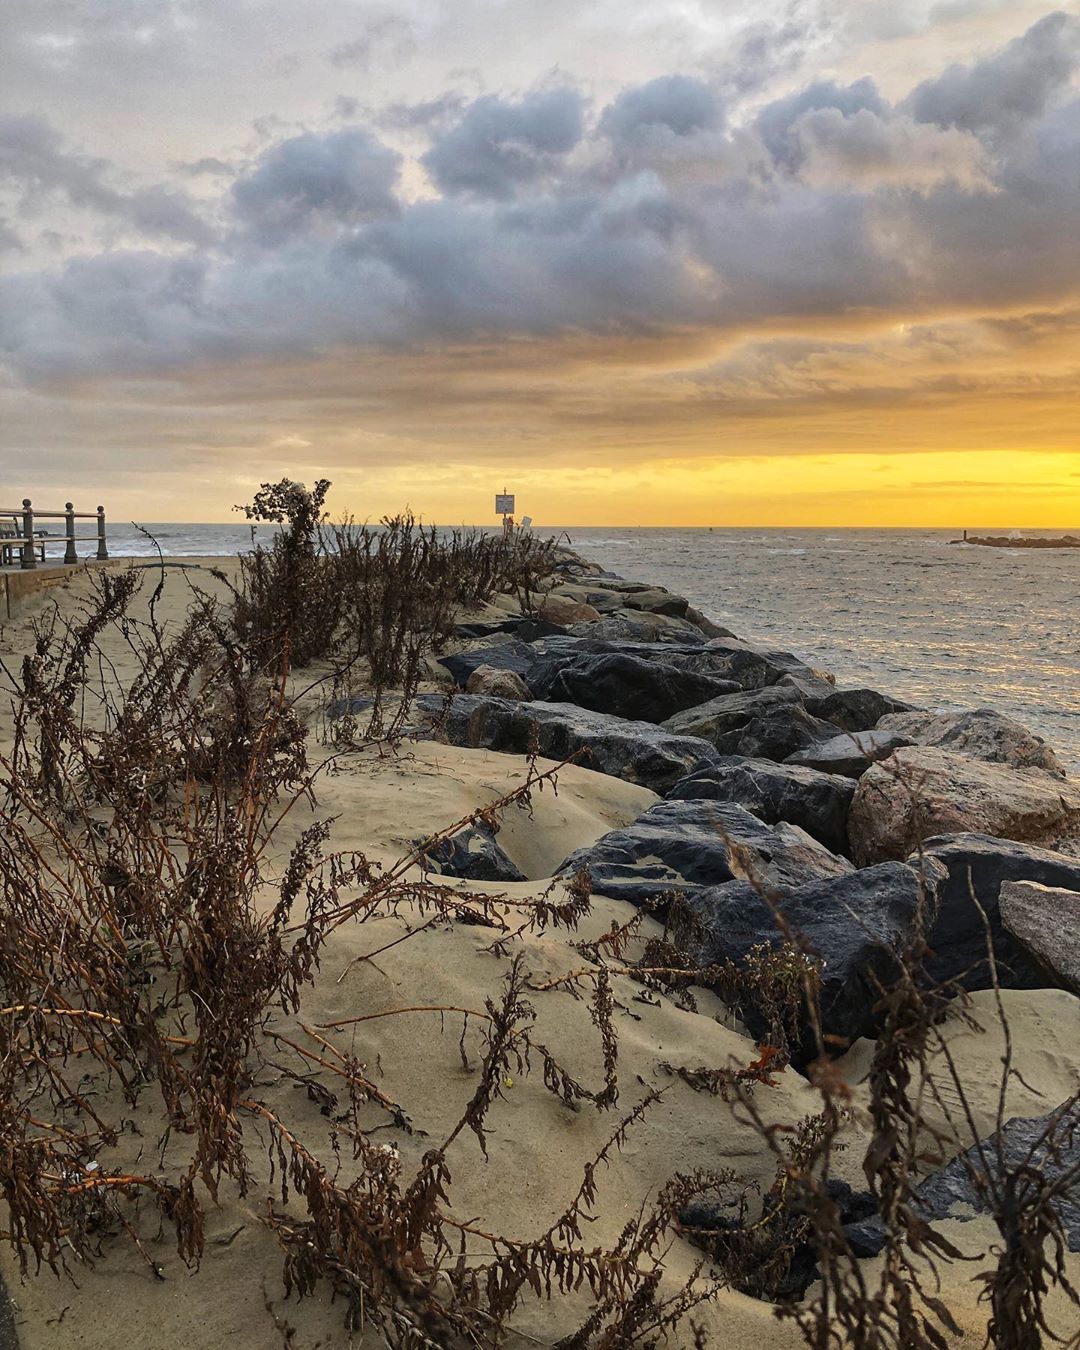 Rocks covered in sand by the ocean at Virginia Beach. Photo by Instagram user @briancoryell